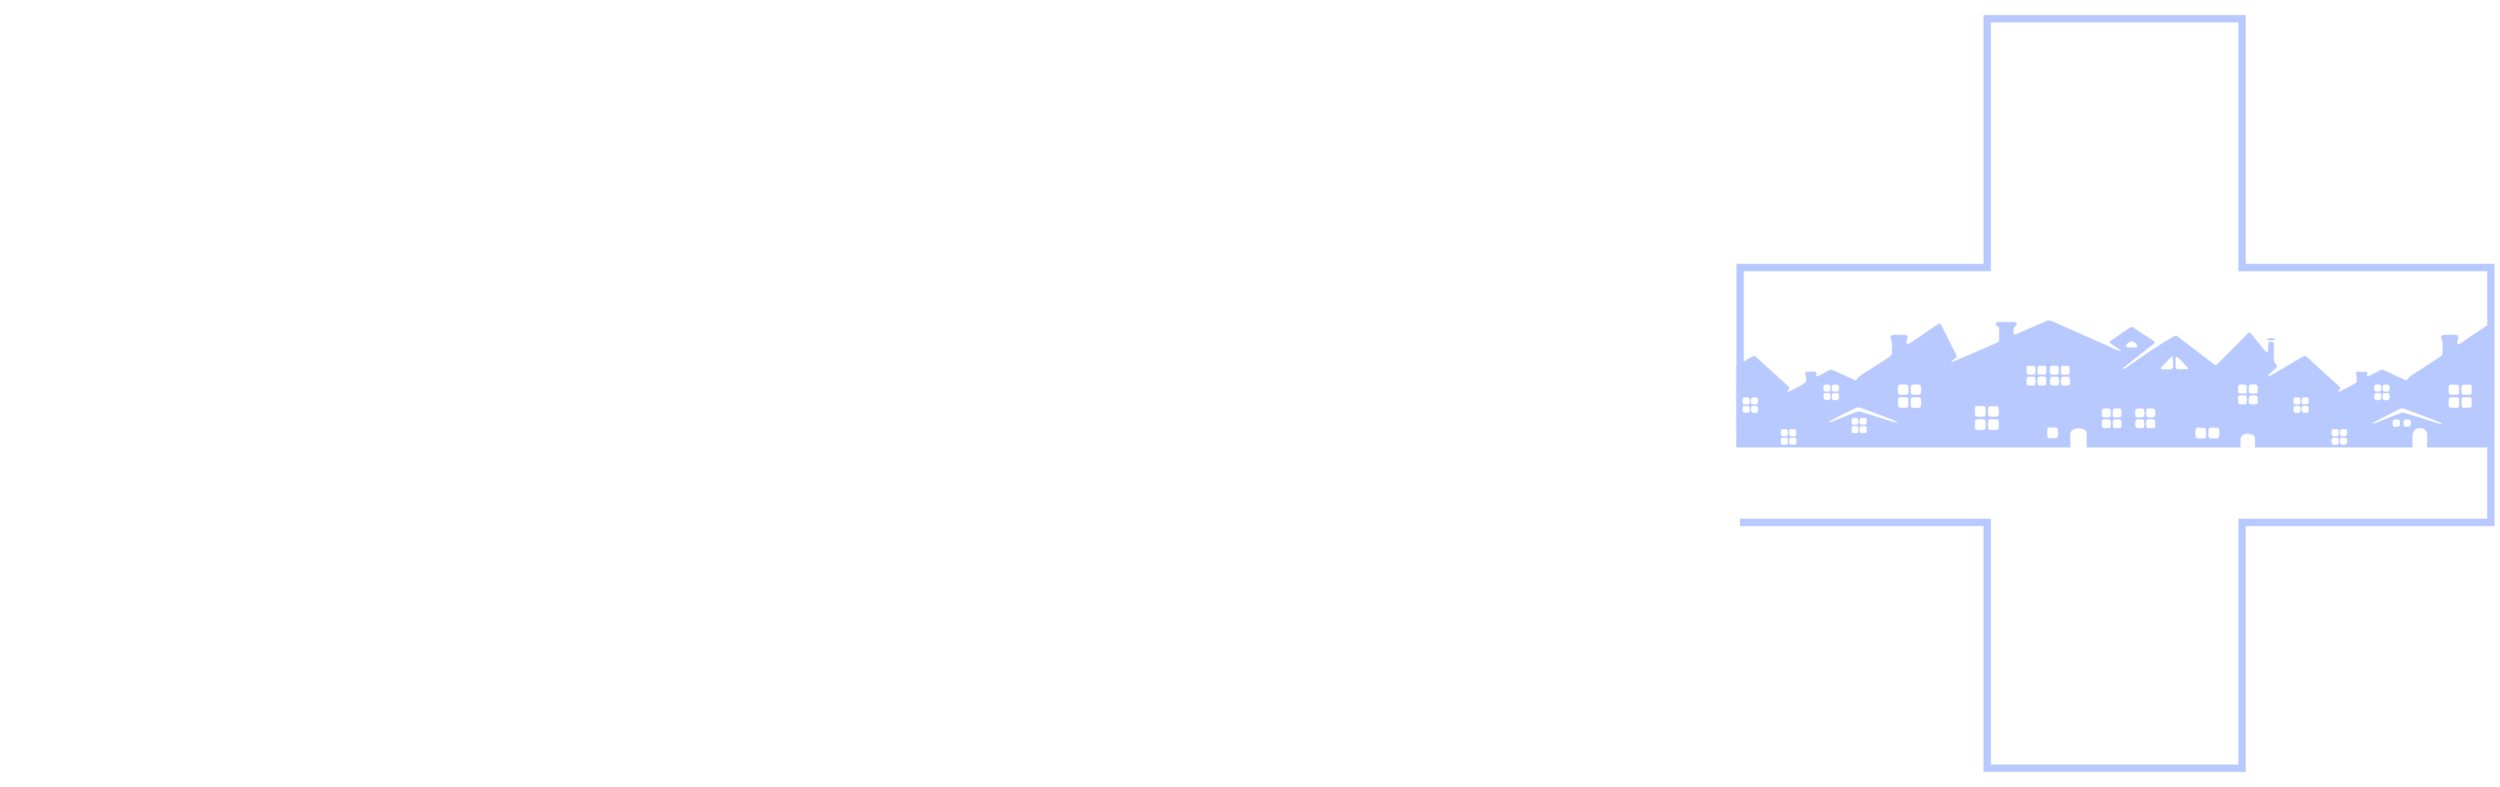 Real Estate Relief